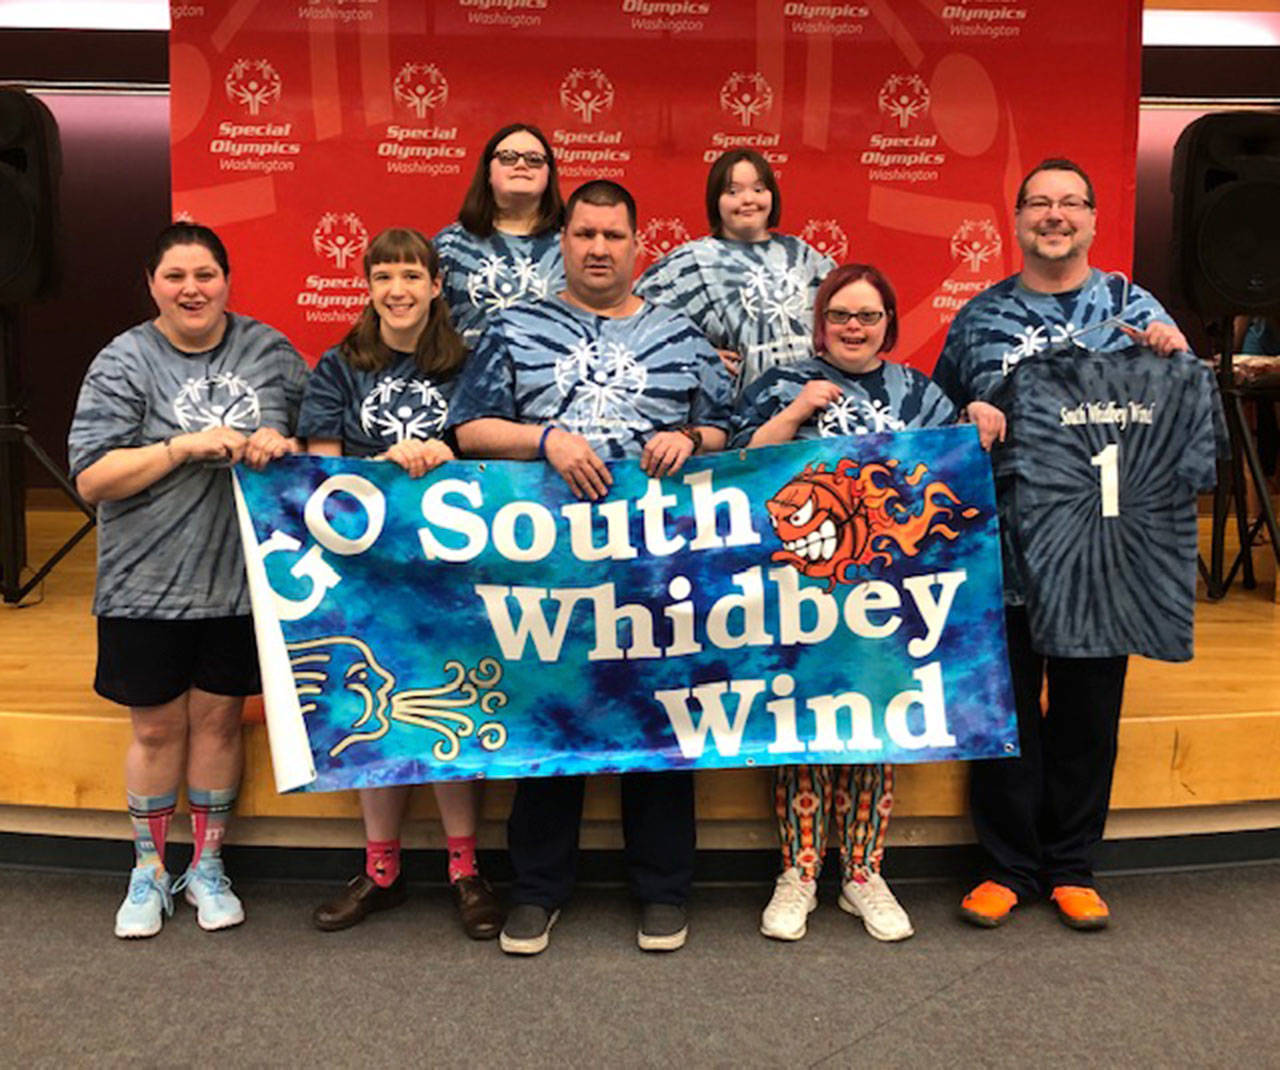 The South Whidbey Wind 1 are the state Special Olympics champion in the basketball skill division. Back row, left to right: Ambria Labadens-Willis and Zoe Thompson; front row: Stacie Lanners, Julietta Cedar, Ryan Hagar, Dagny Schellenberg and coach Steve Thompson. (Submitted photo)